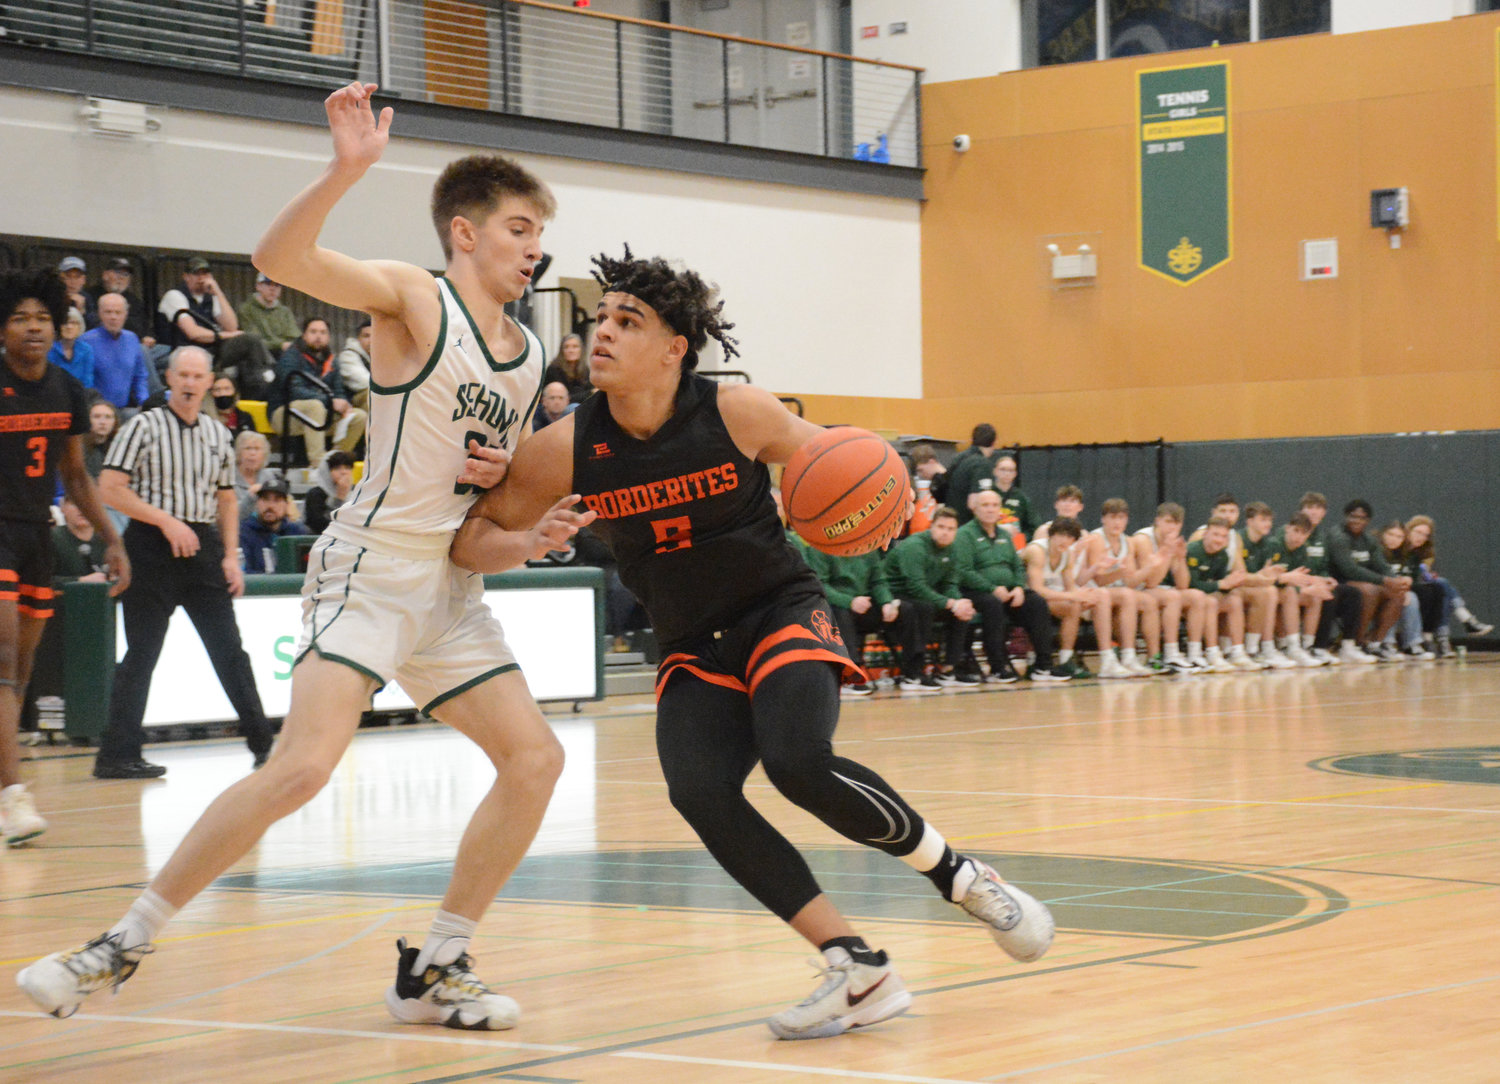 Lawrence Creasey Pulphus with the ball in the Borderites’ 60-49 loss to Sehome High School on January 31. Blaine boys basketball plays its final regular season game against Ferndale on Thursday, February 2.